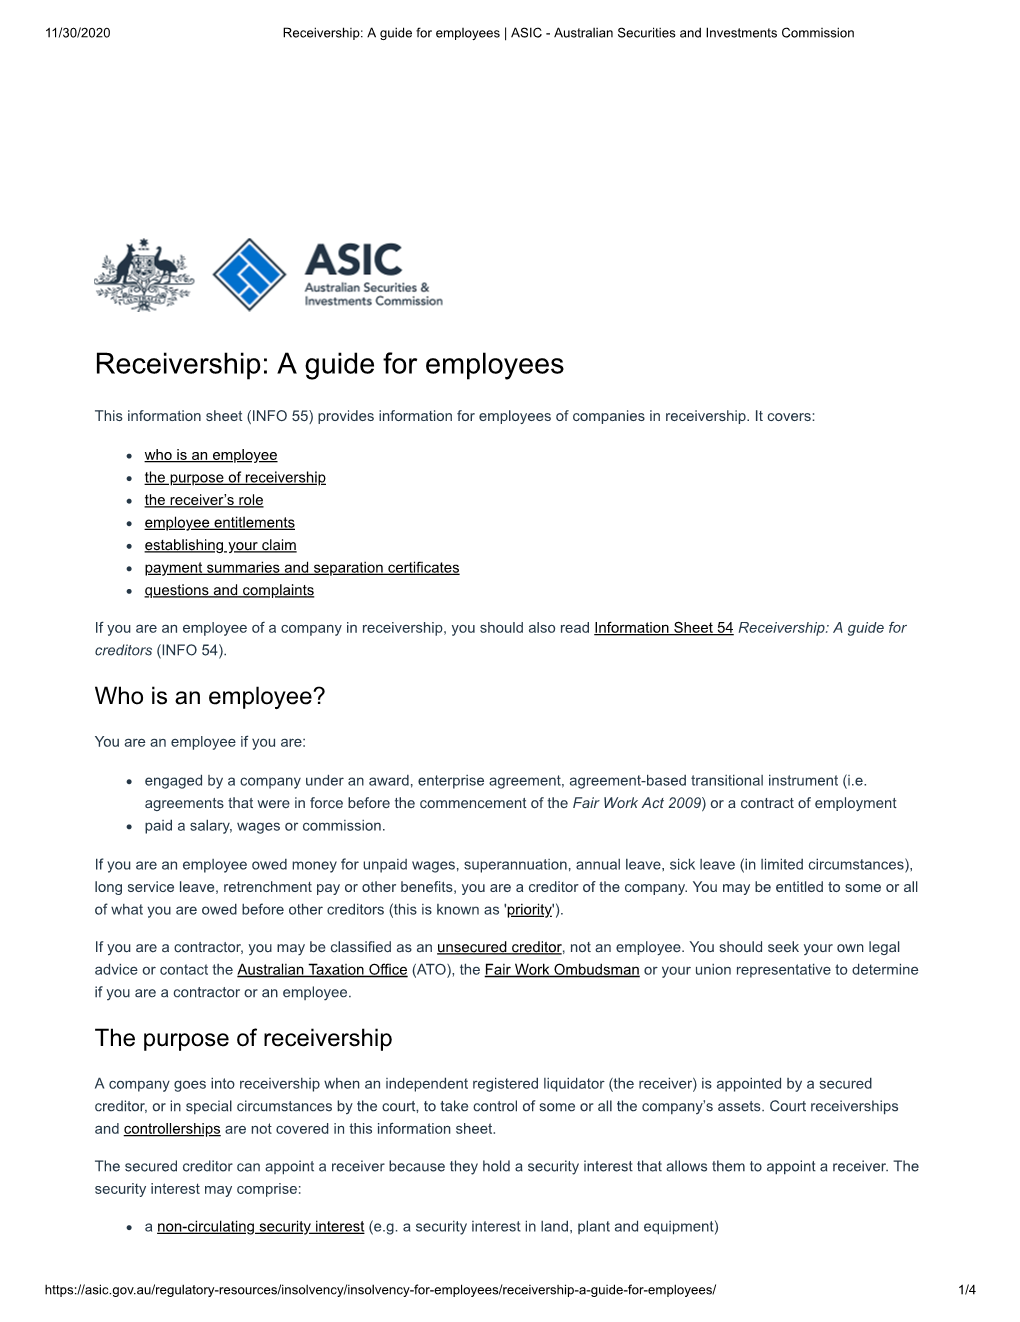 Receivership Asics Guide for Employees INFO 55